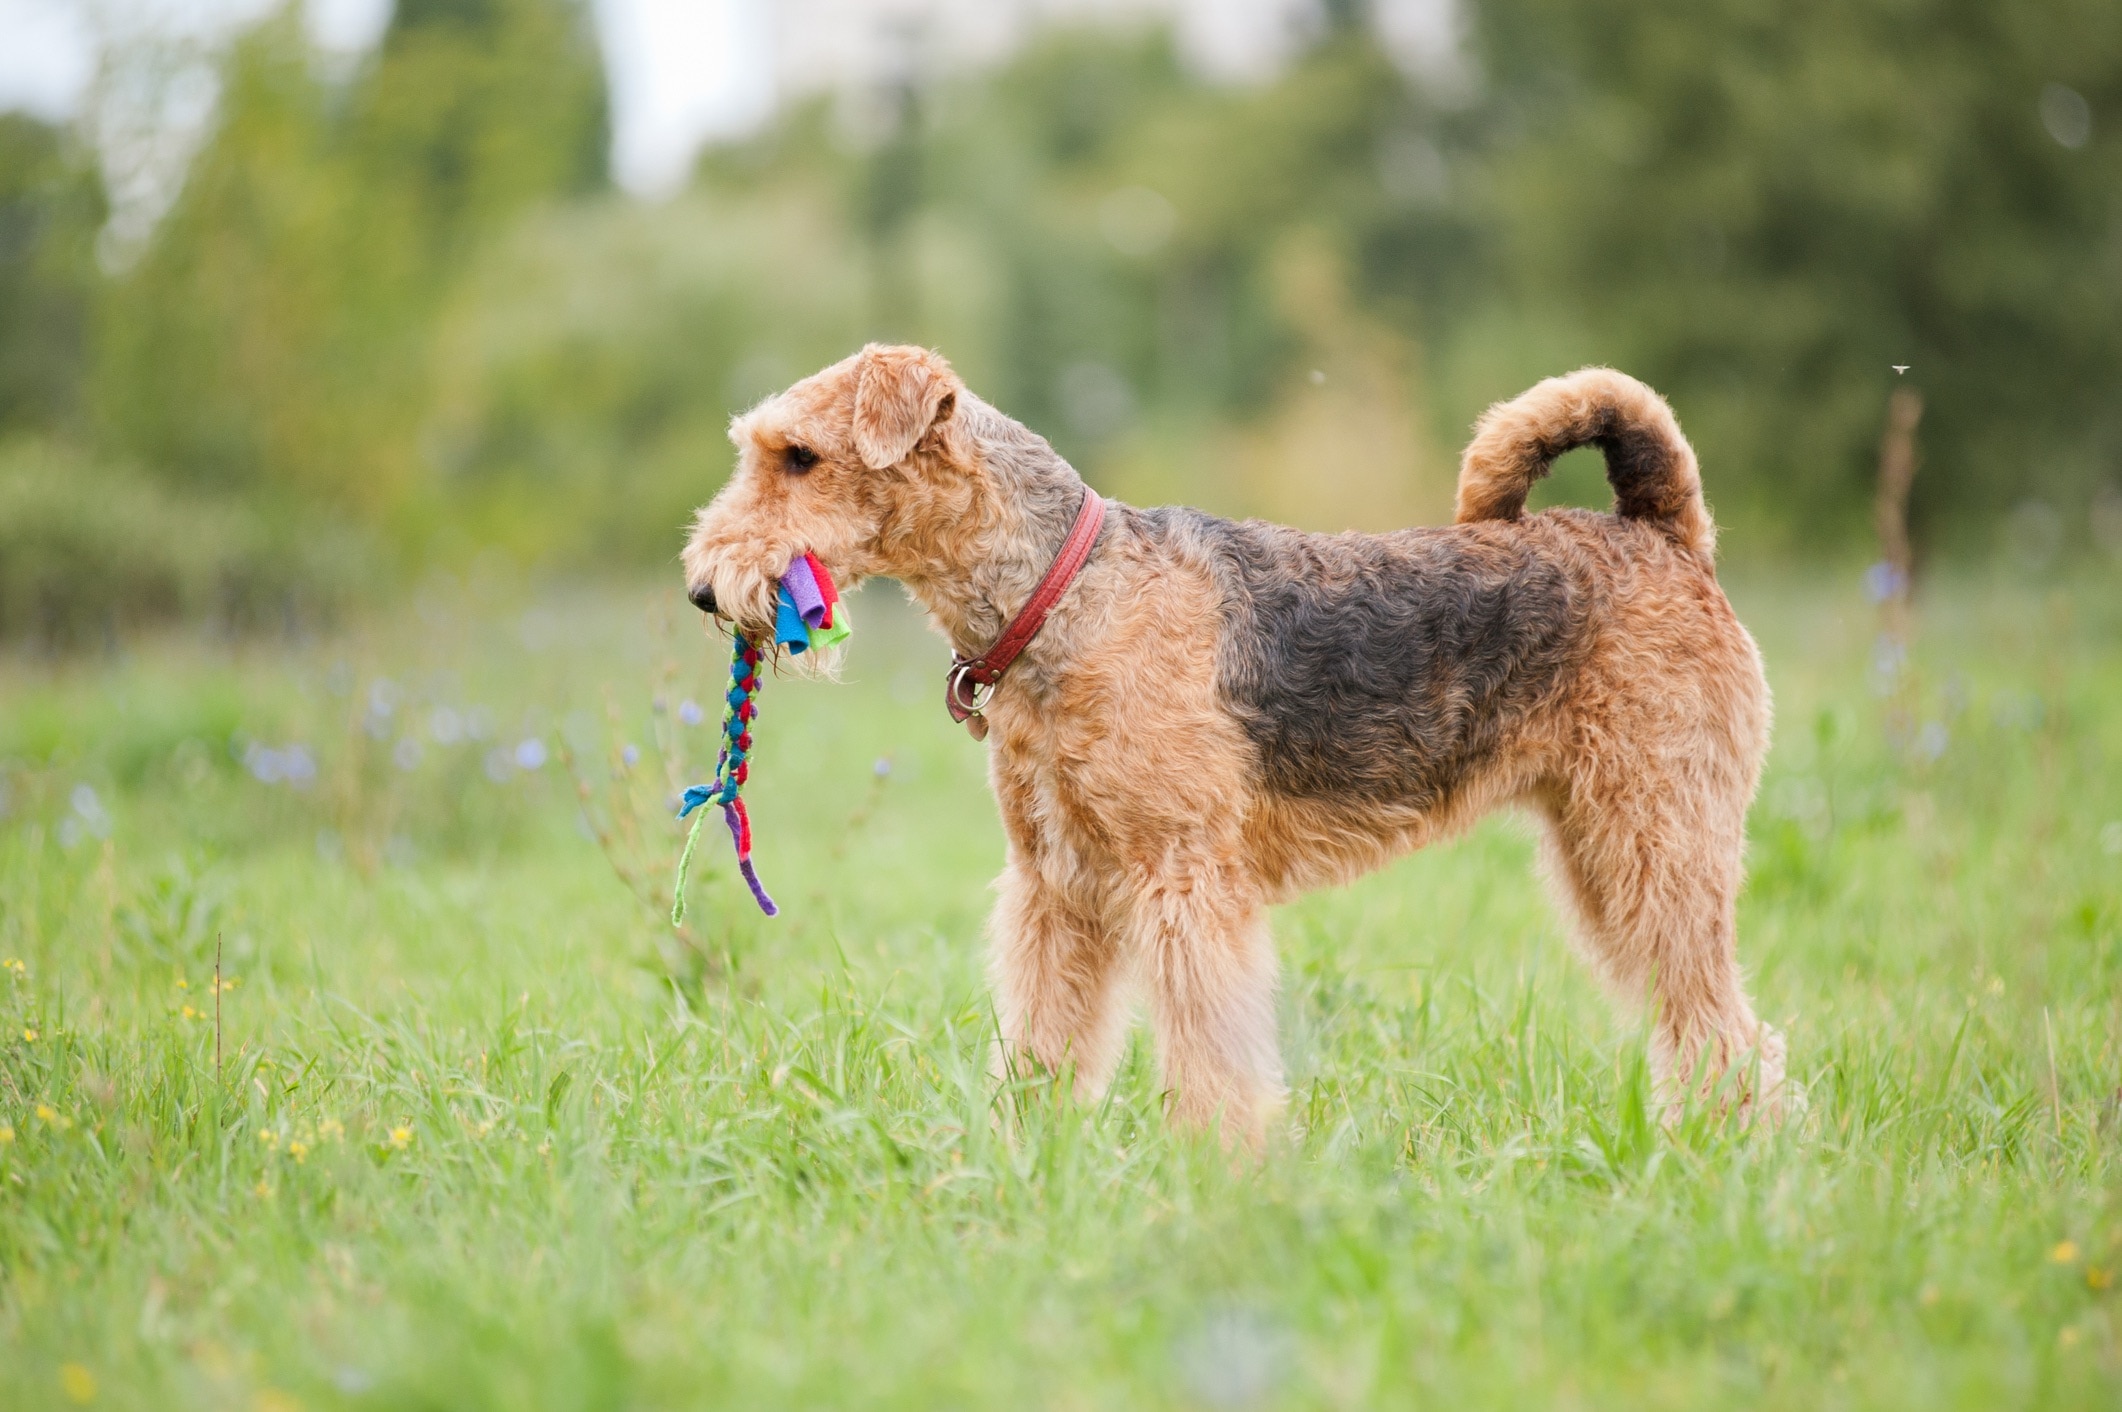 airedale terrier holding a colorful toy in his mouth